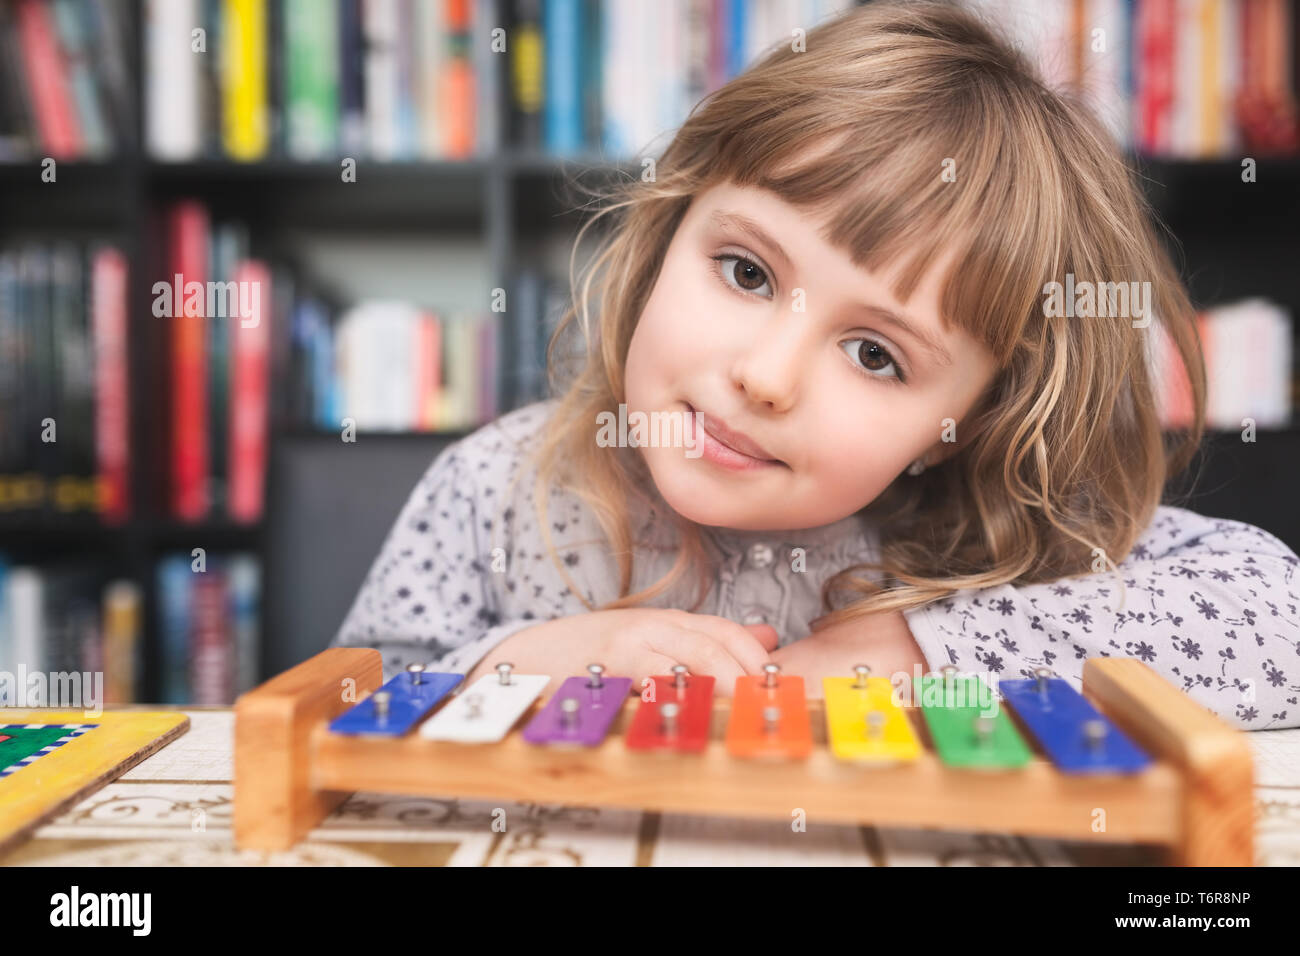 Cute little girl playing colorful cymbals Stock Photo